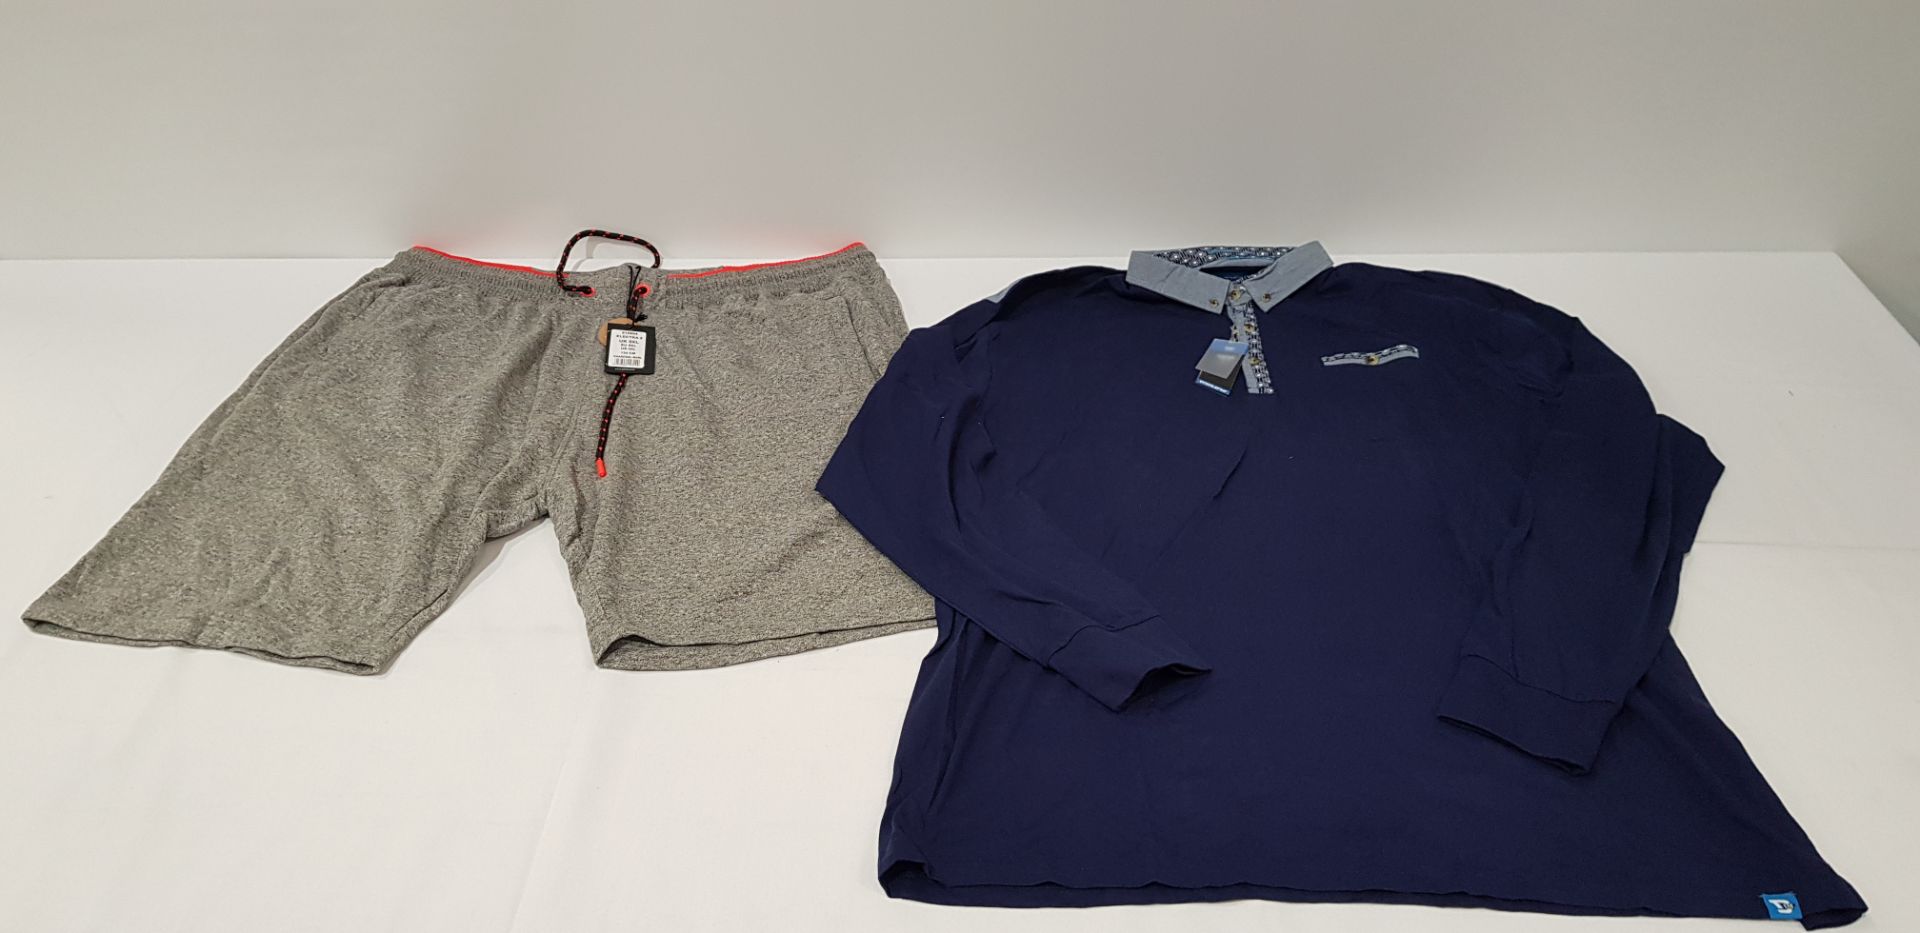 8 X BRAND NEW MIXED DUKE SHORTS, T-SHIRTS, POLO TOPS AND TROUSERS. ALL IN MIXED SIZES AND STYLES (